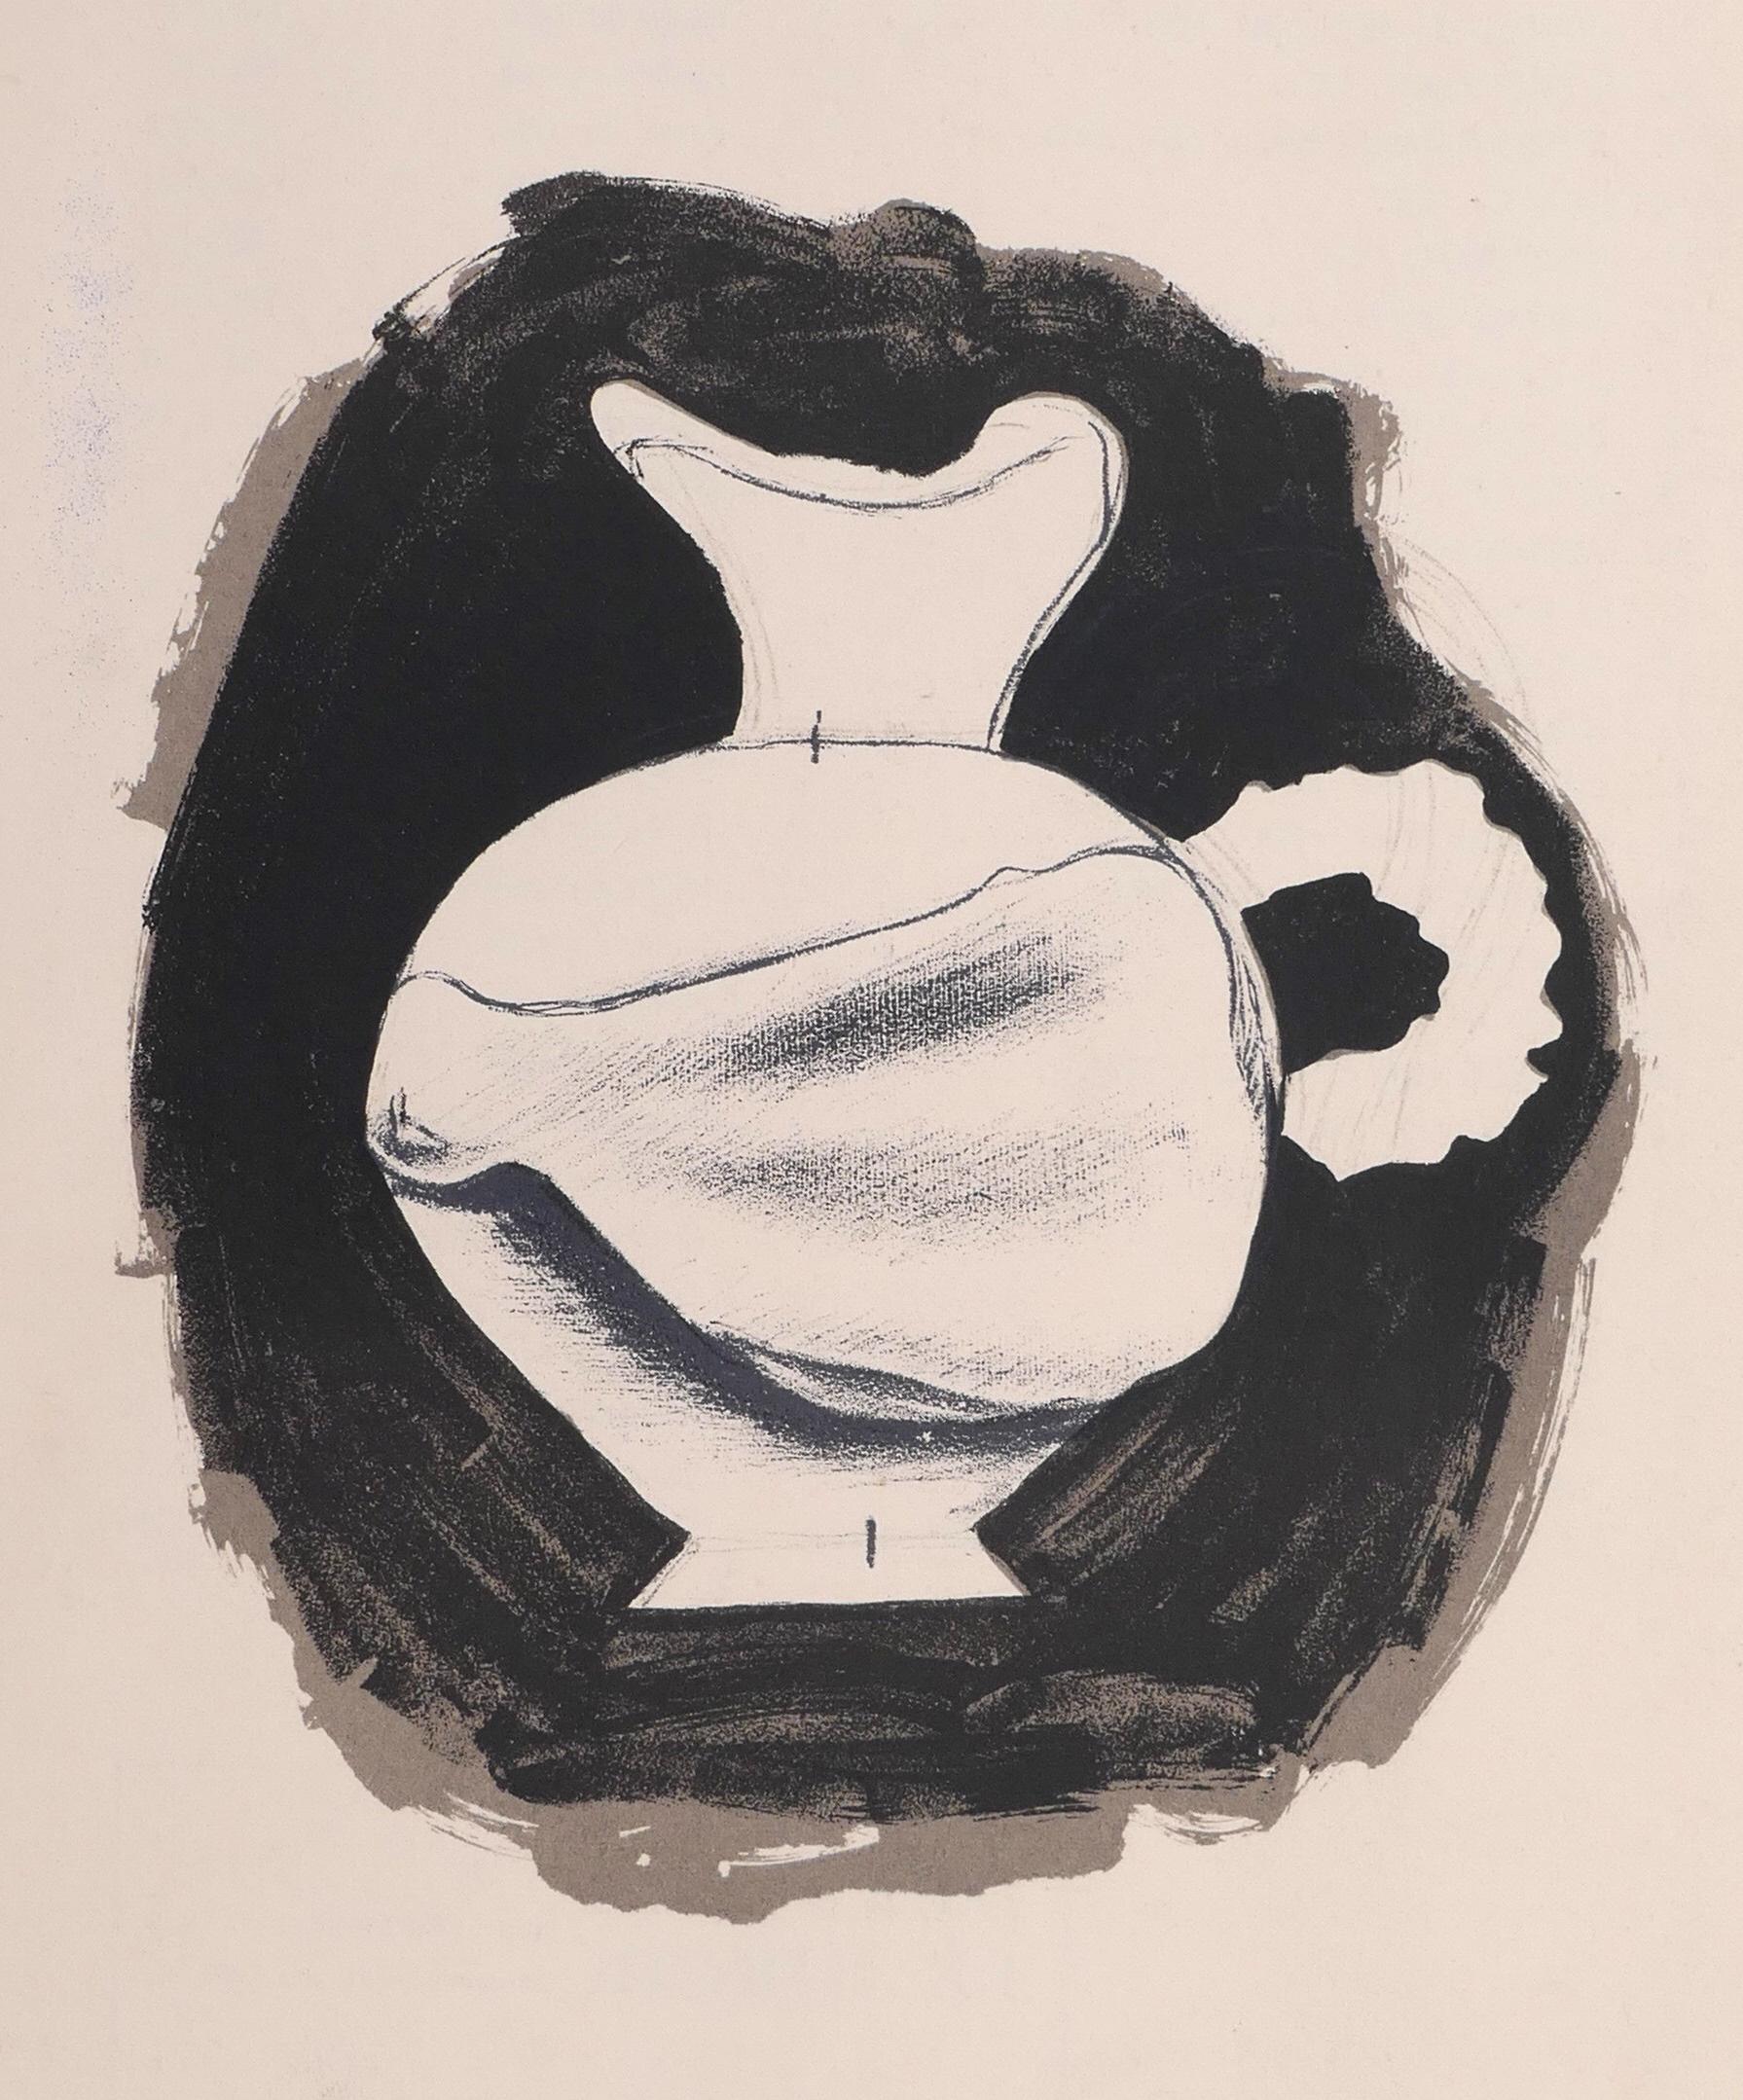 Untitled - Pitcher - Lithograph by Georges Braque - 1959